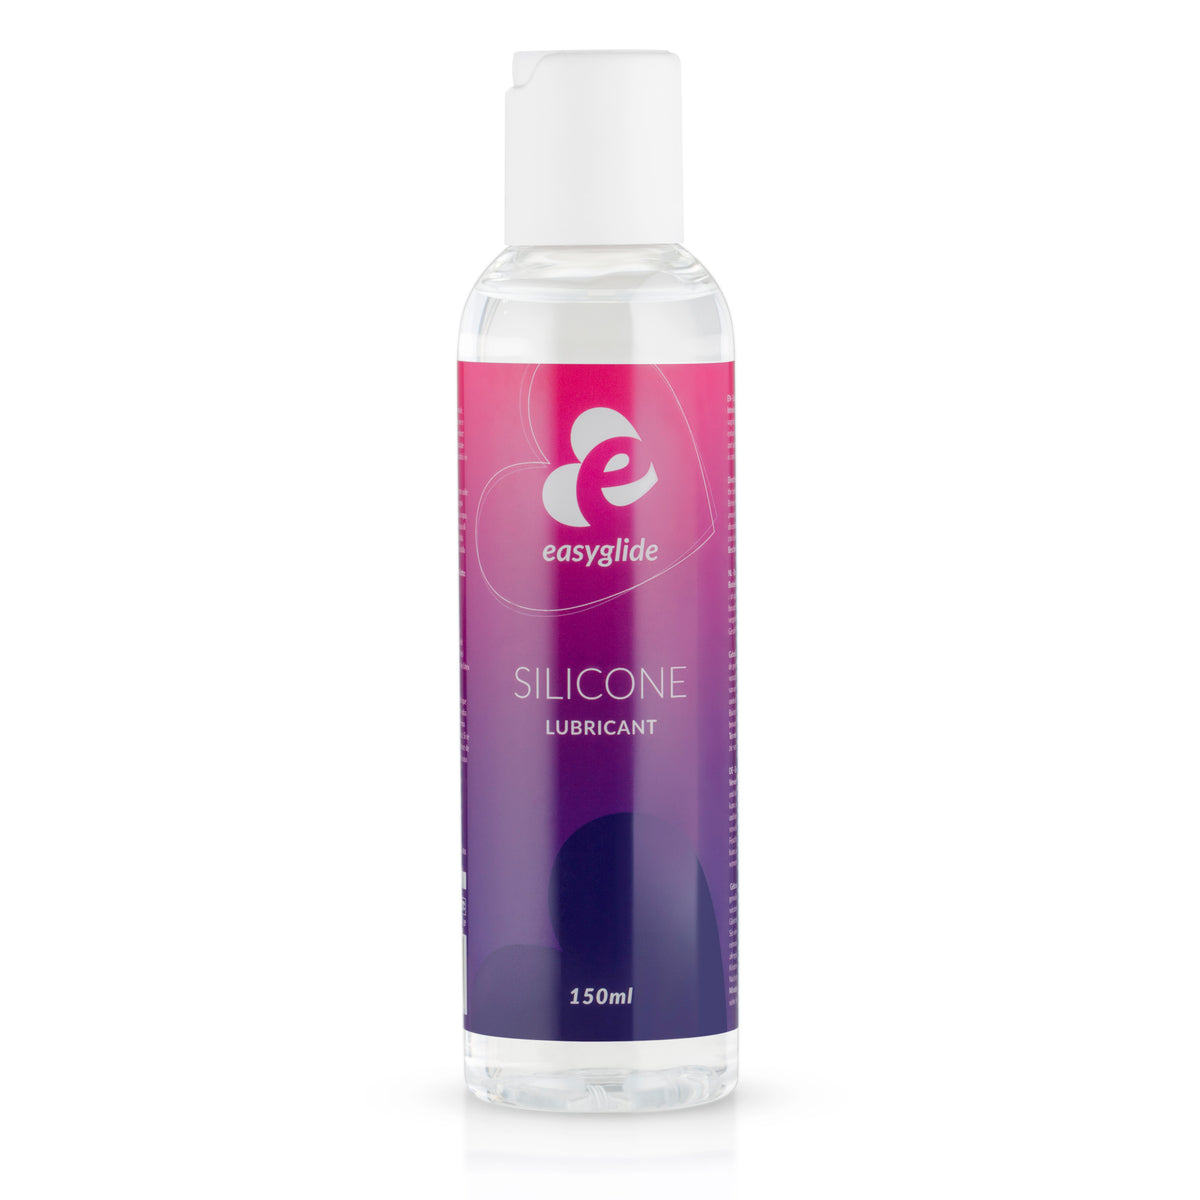 Easyglide Silicone Lubricant – 150 ml